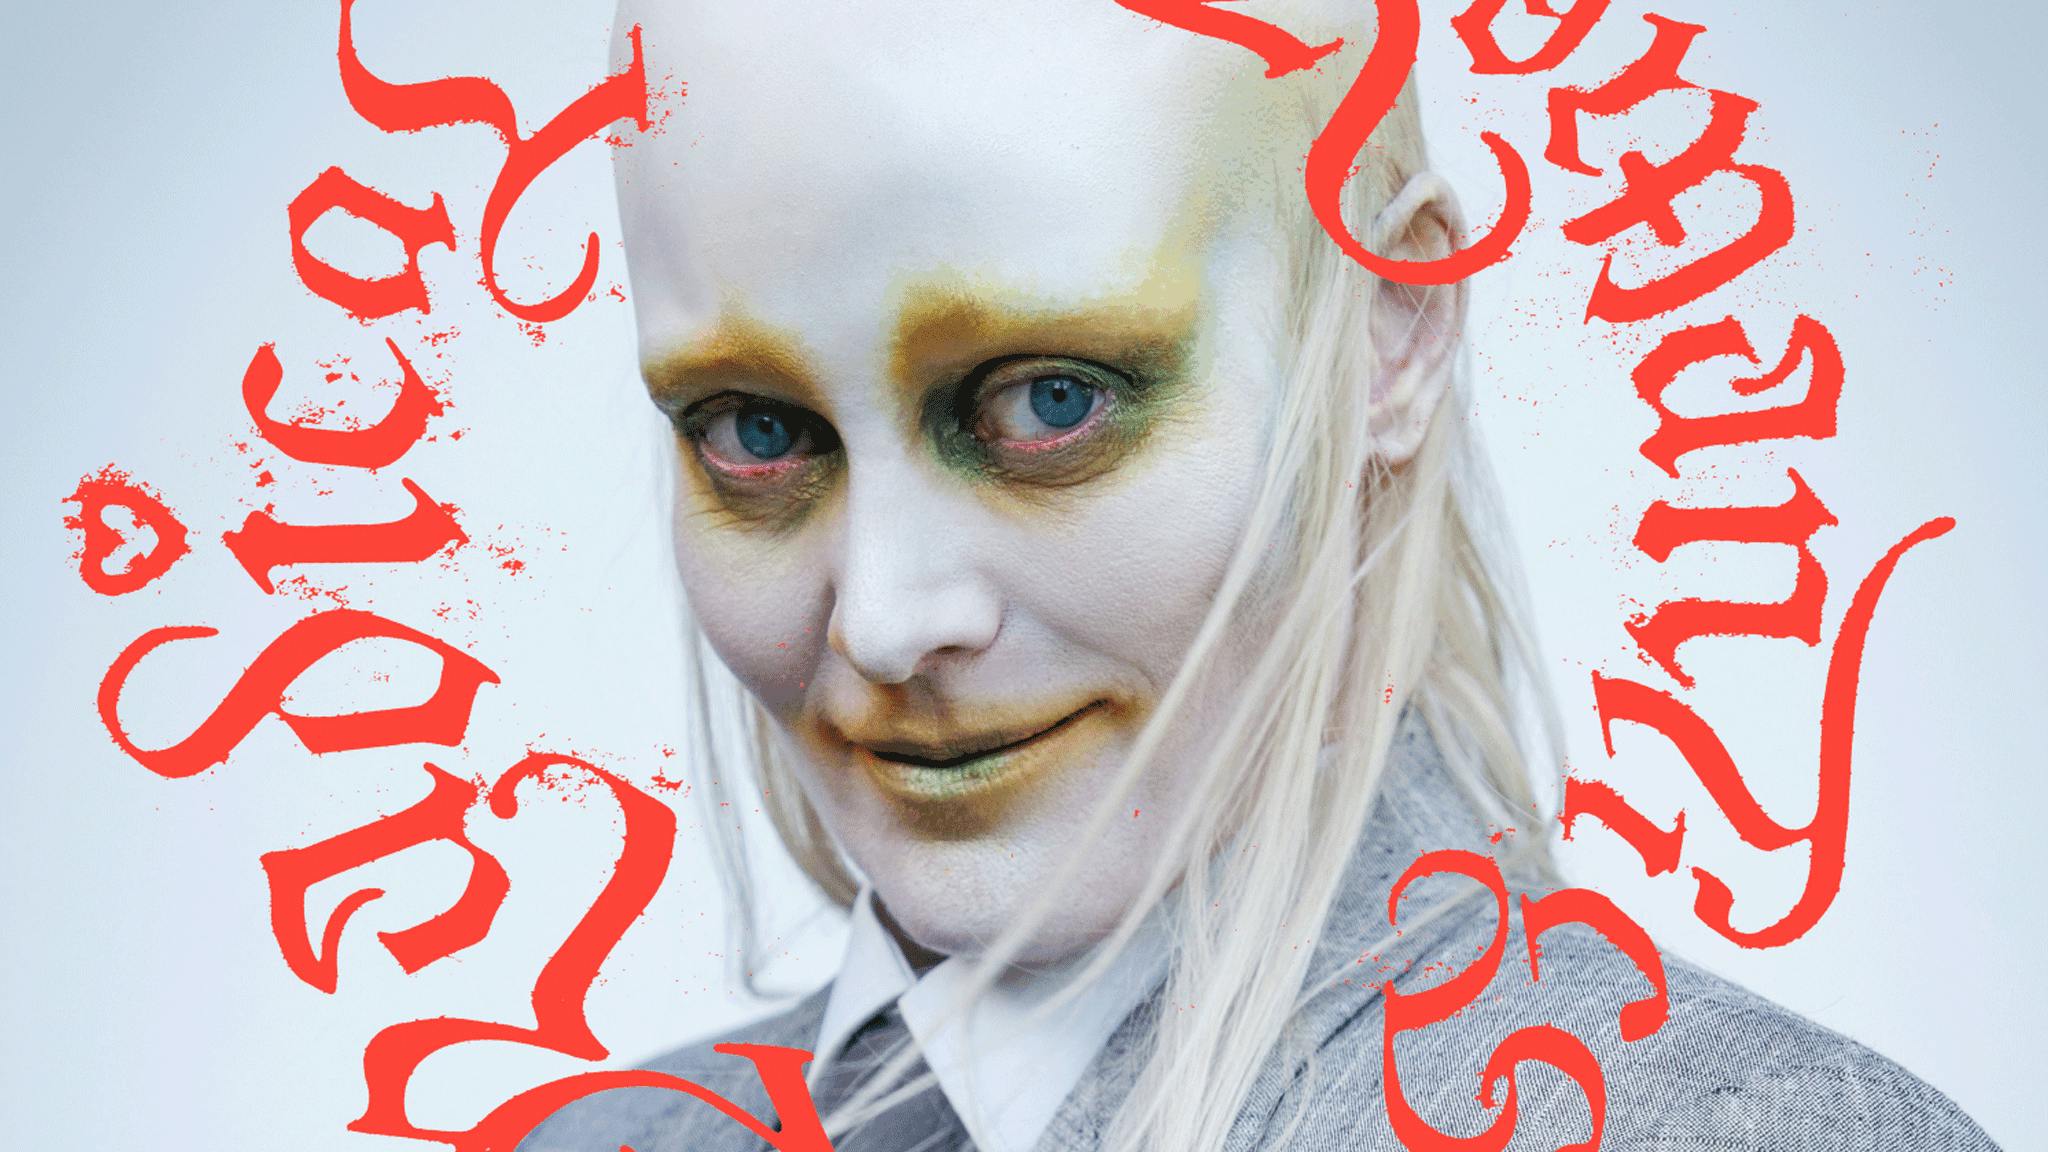 Hear two new Fever Ray songs produced by Nine Inch Nails